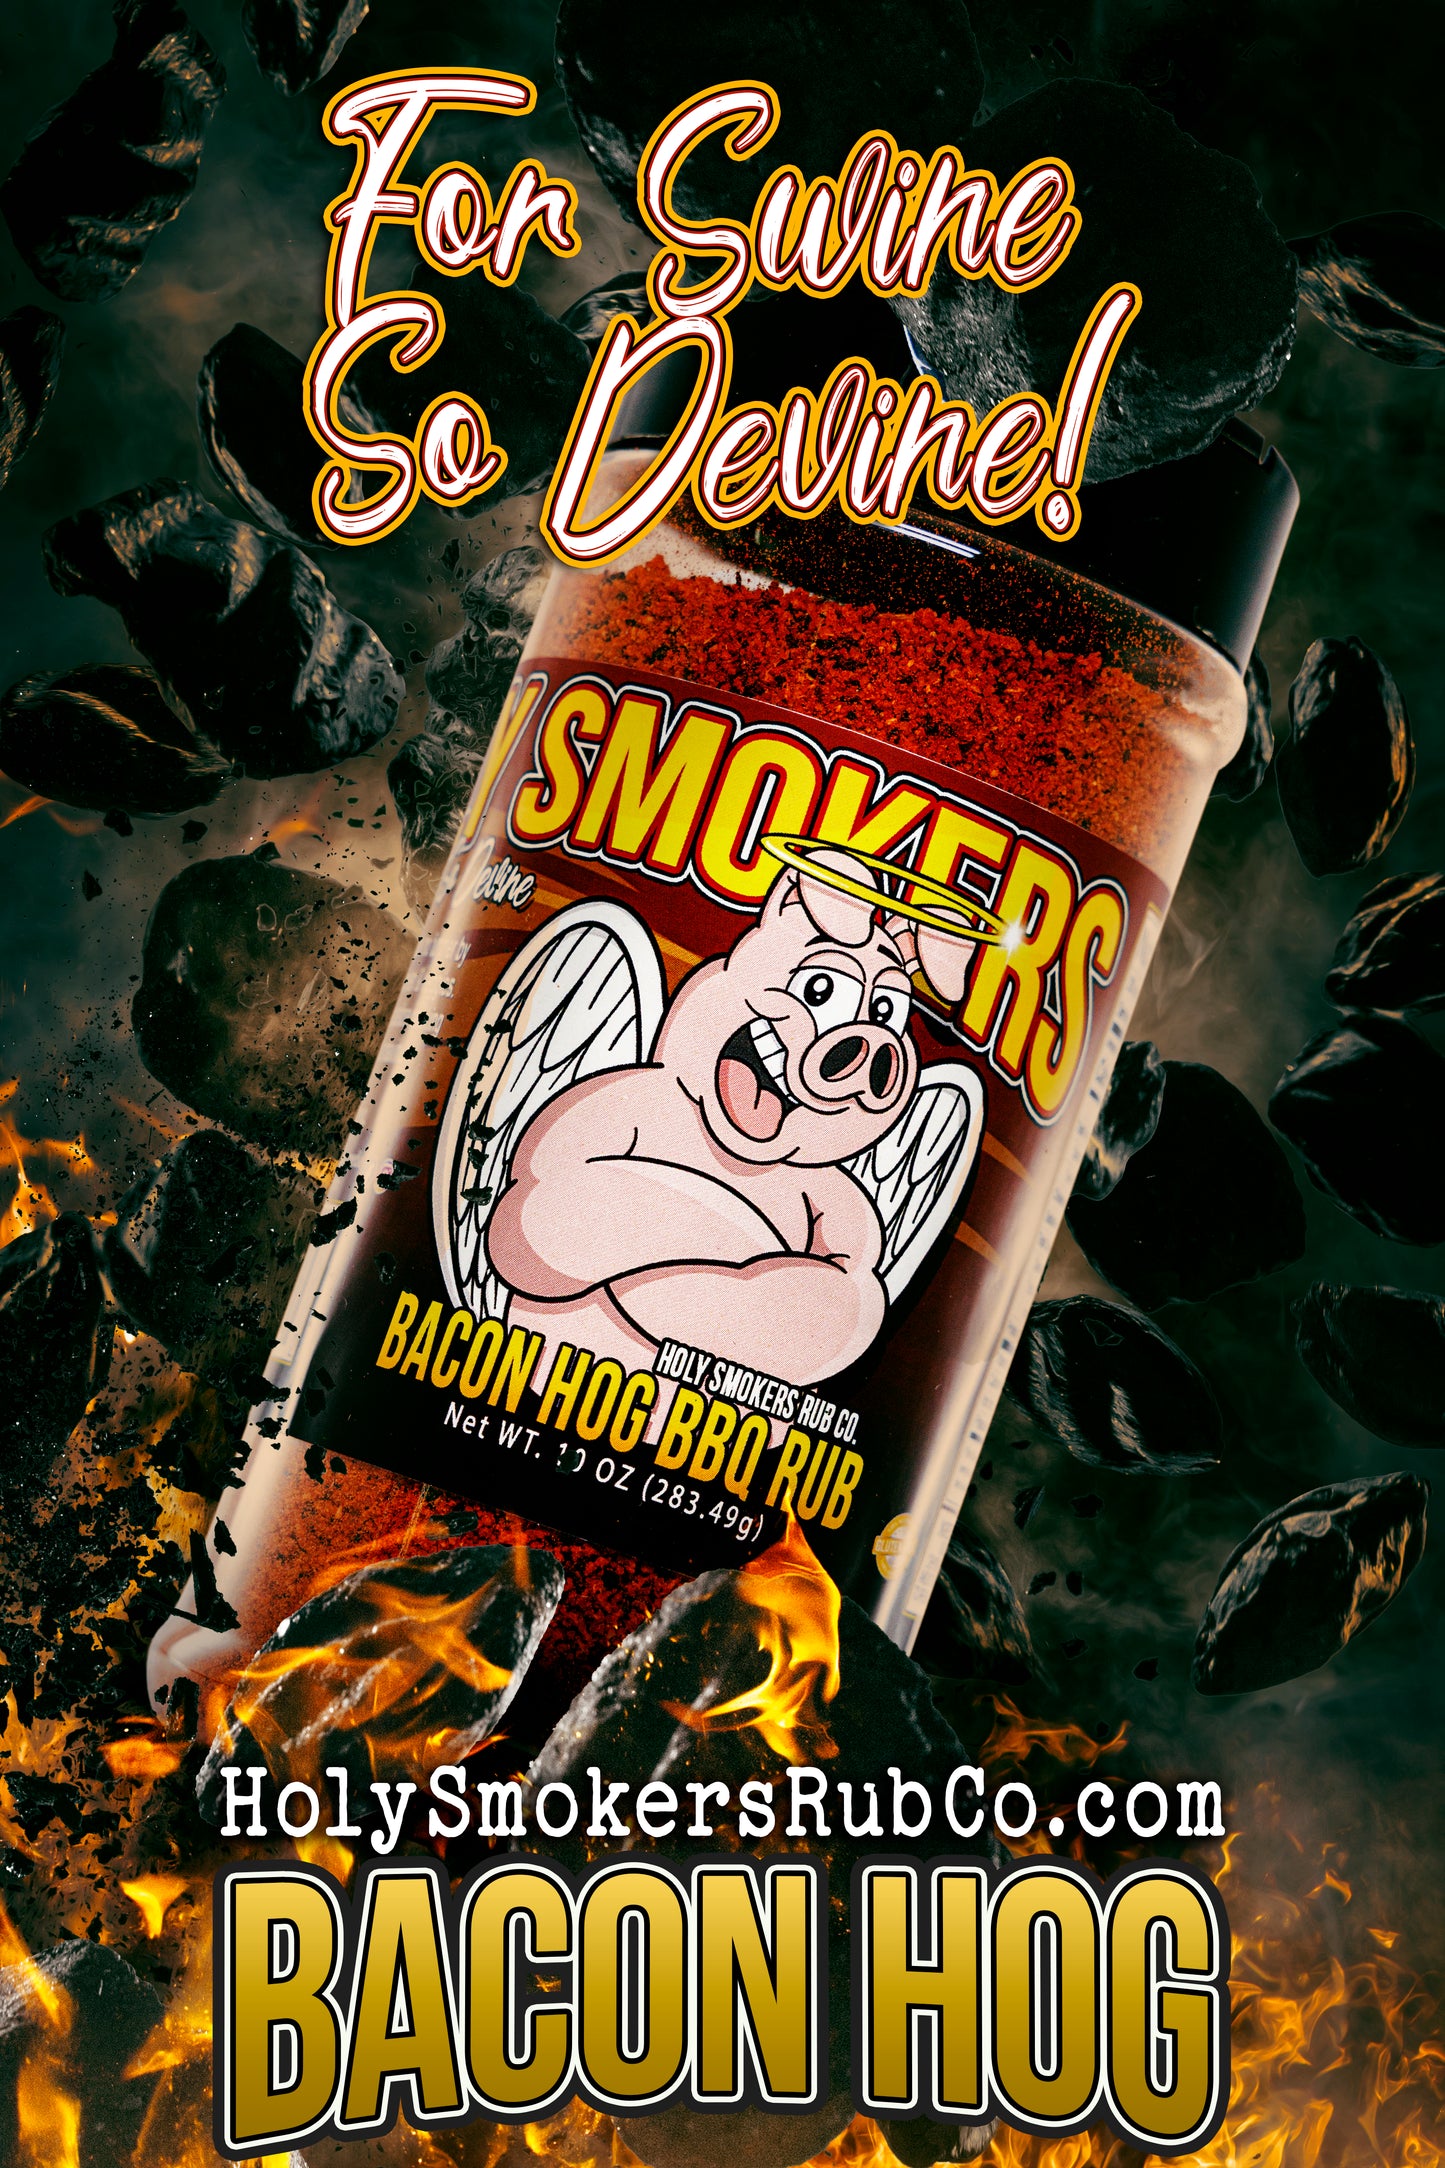 The Best Bacon Hog BBQ Rub is here. Season any pork, chicken, beef or veggies and be prepared to taste heaven